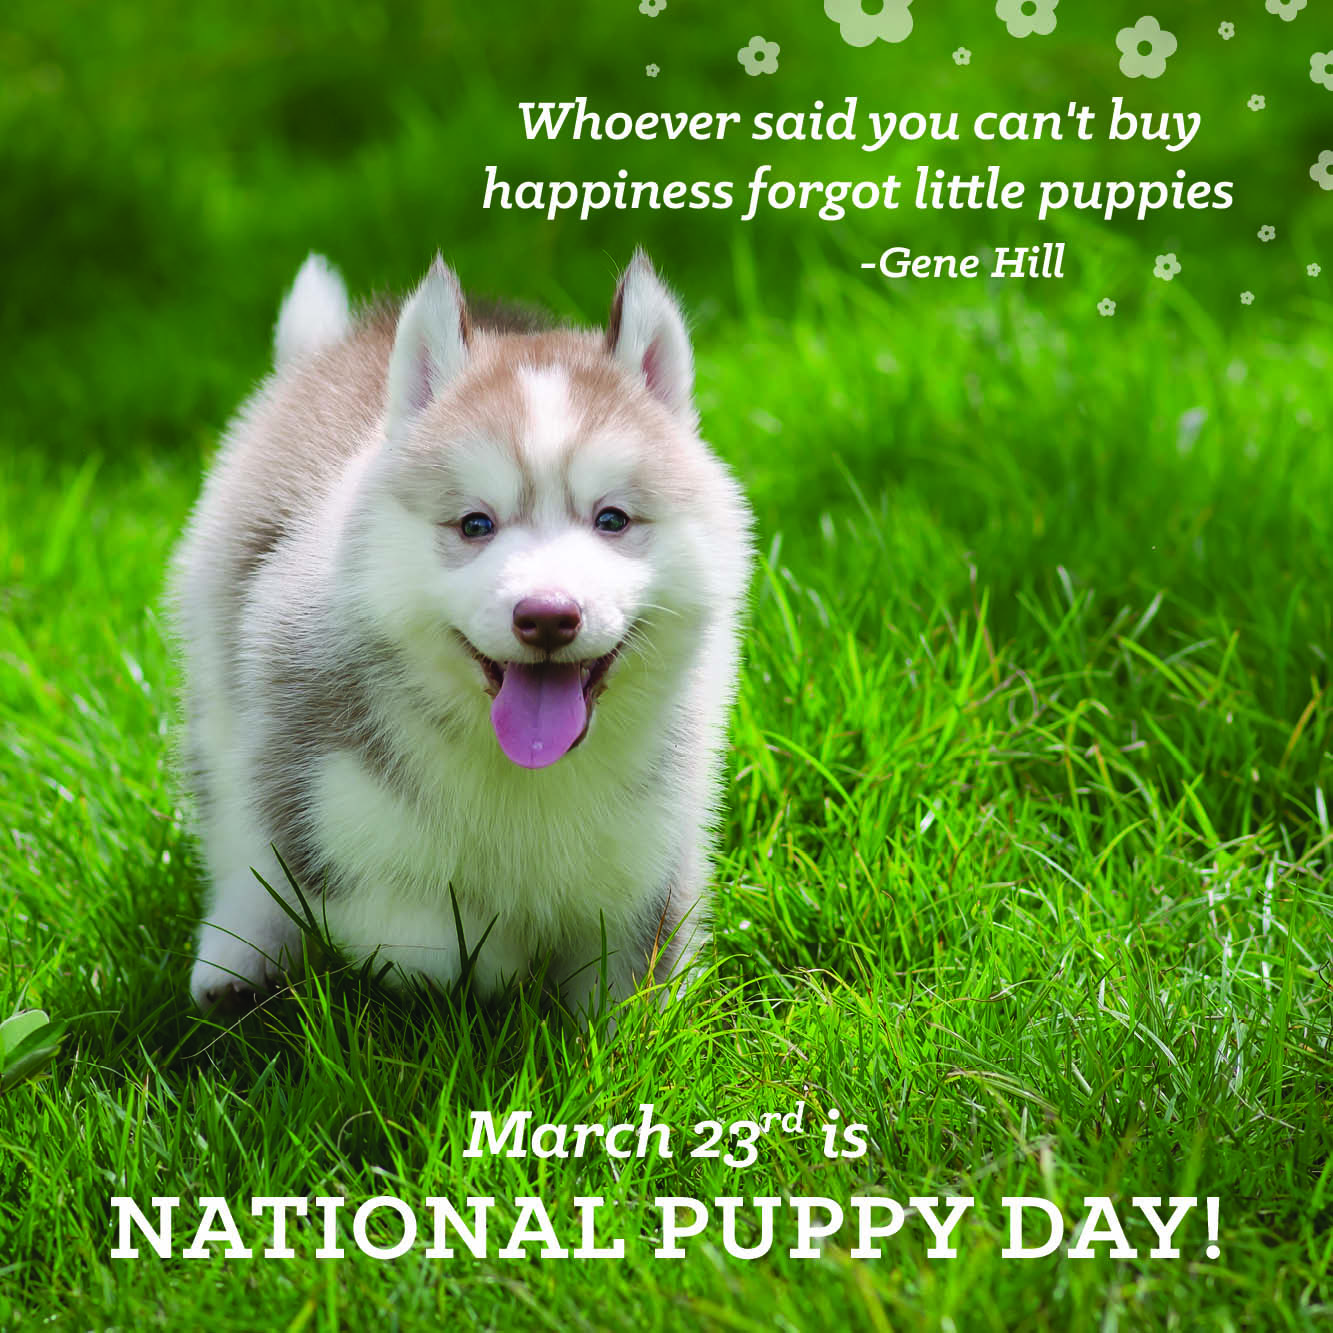 Happy National Puppy Day!